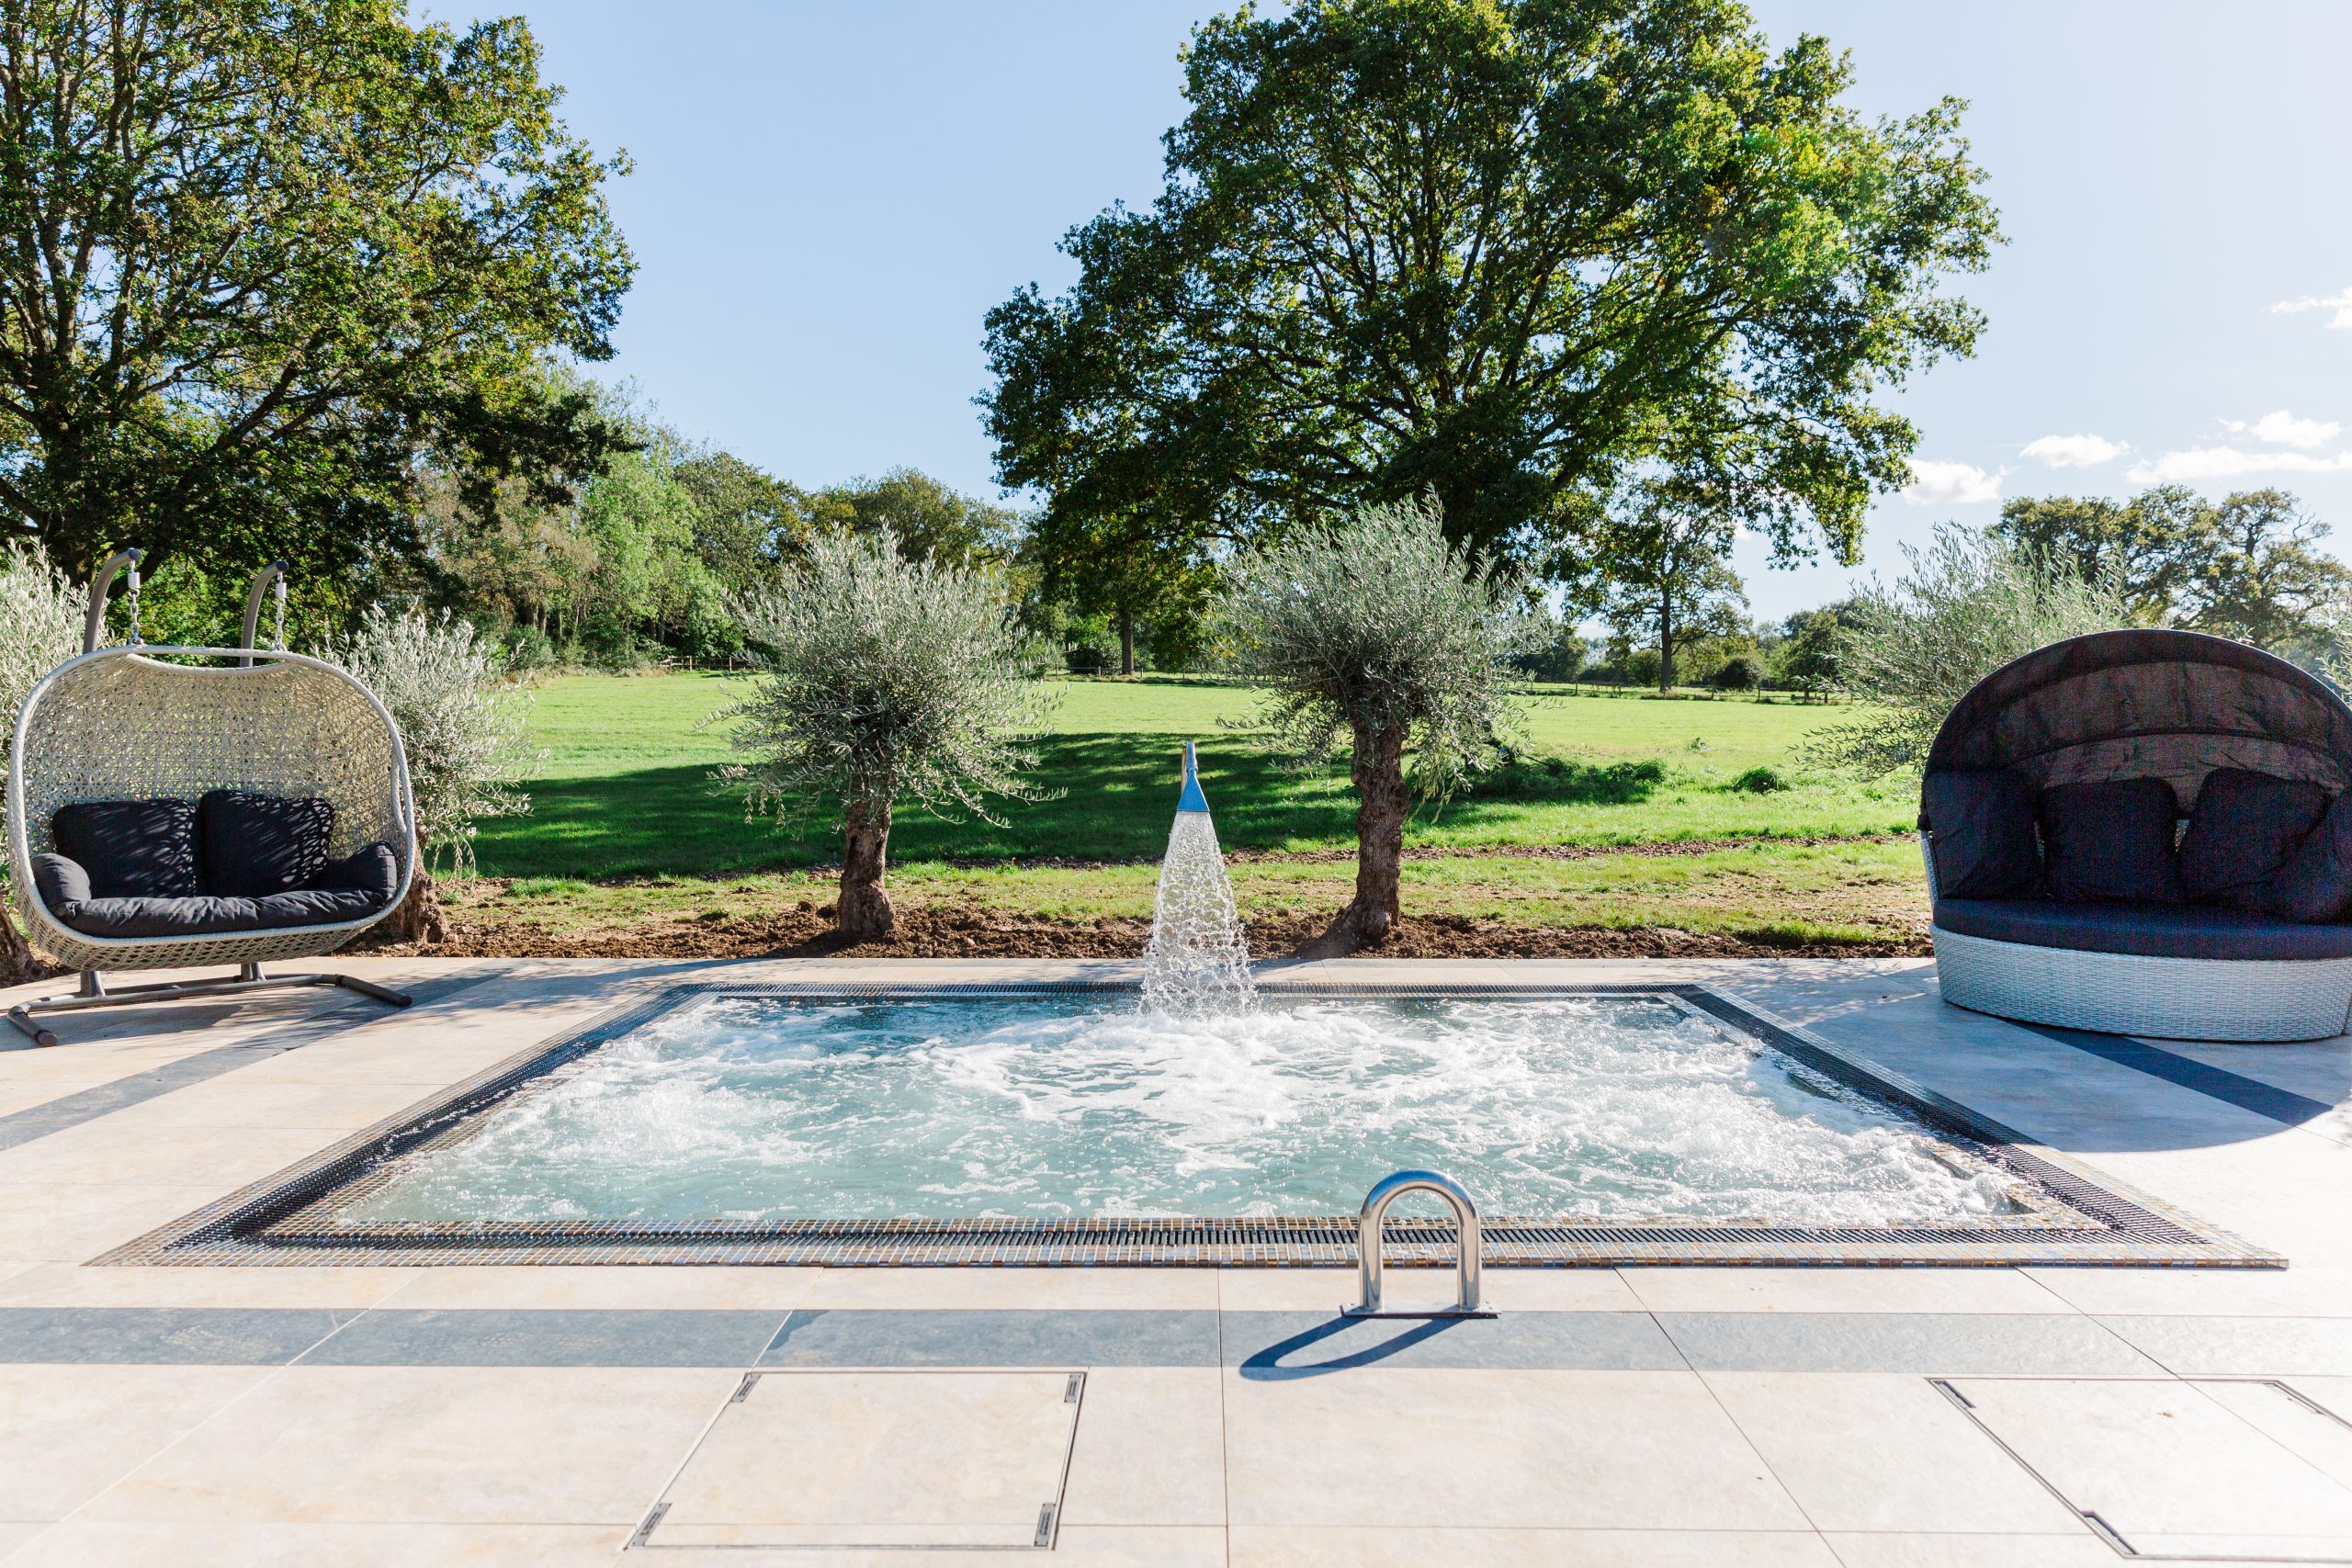 Outdoor vitality pool jacuzzi at Guildford Manor Hotel